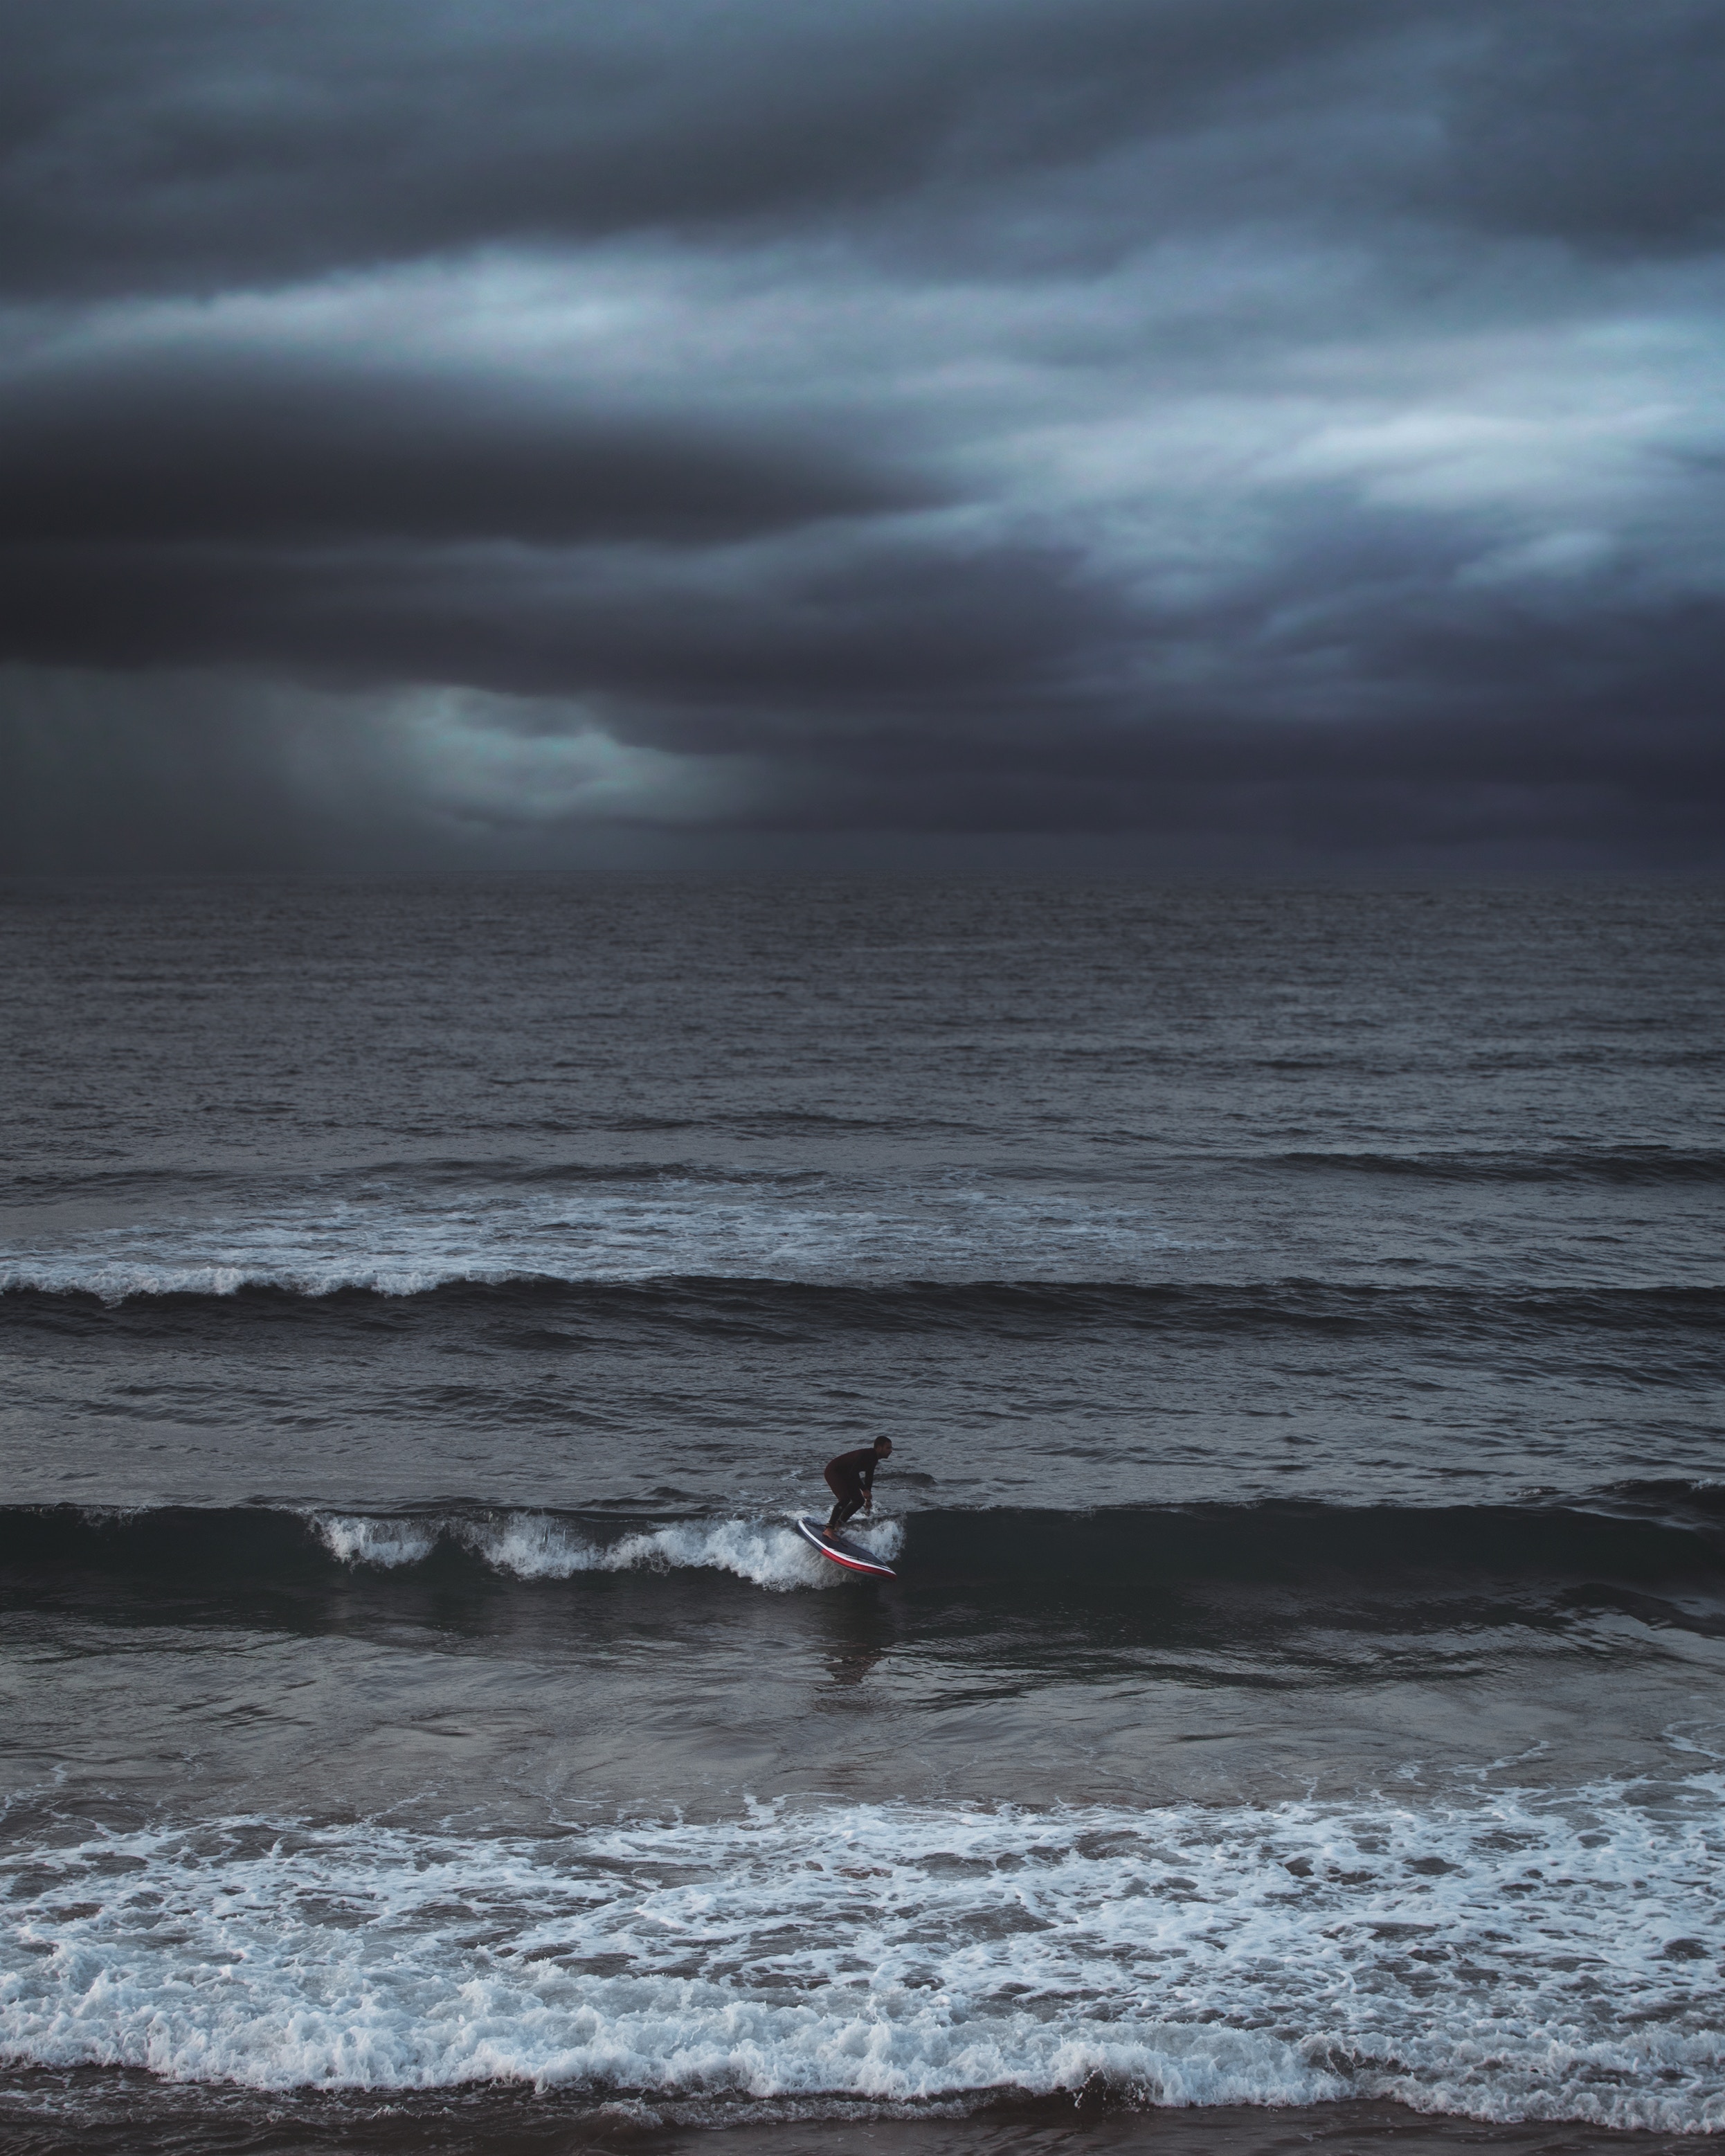 sports, sea, waves, serfing, ocean, mainly cloudy, overcast, surfer